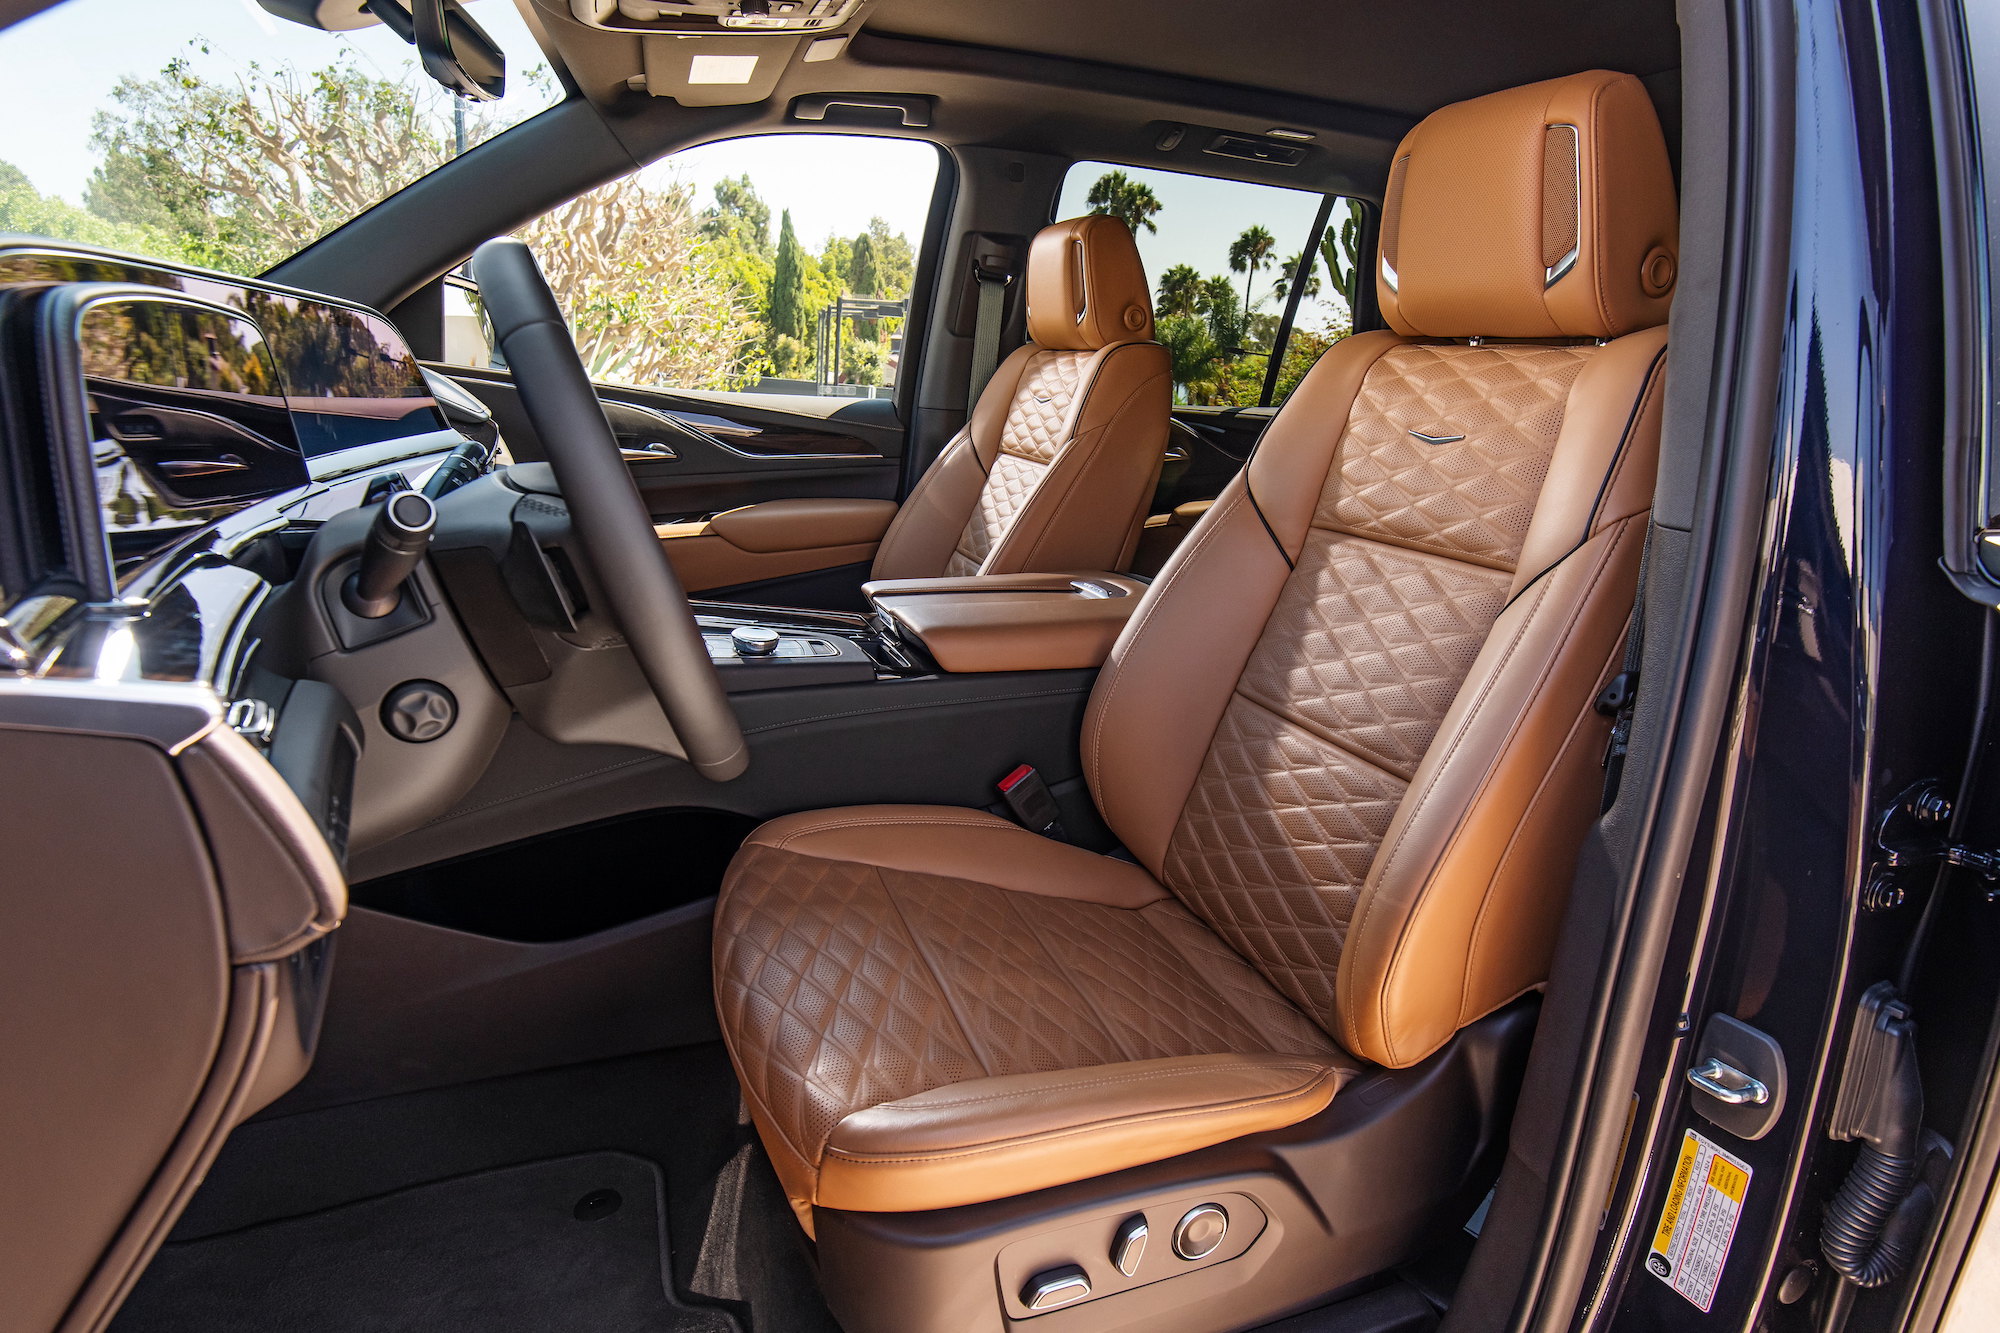 A 2021 Cadillac Escalade Brandy interior with Very Dark Atmosphere accents and full leather seats with faceted quilting